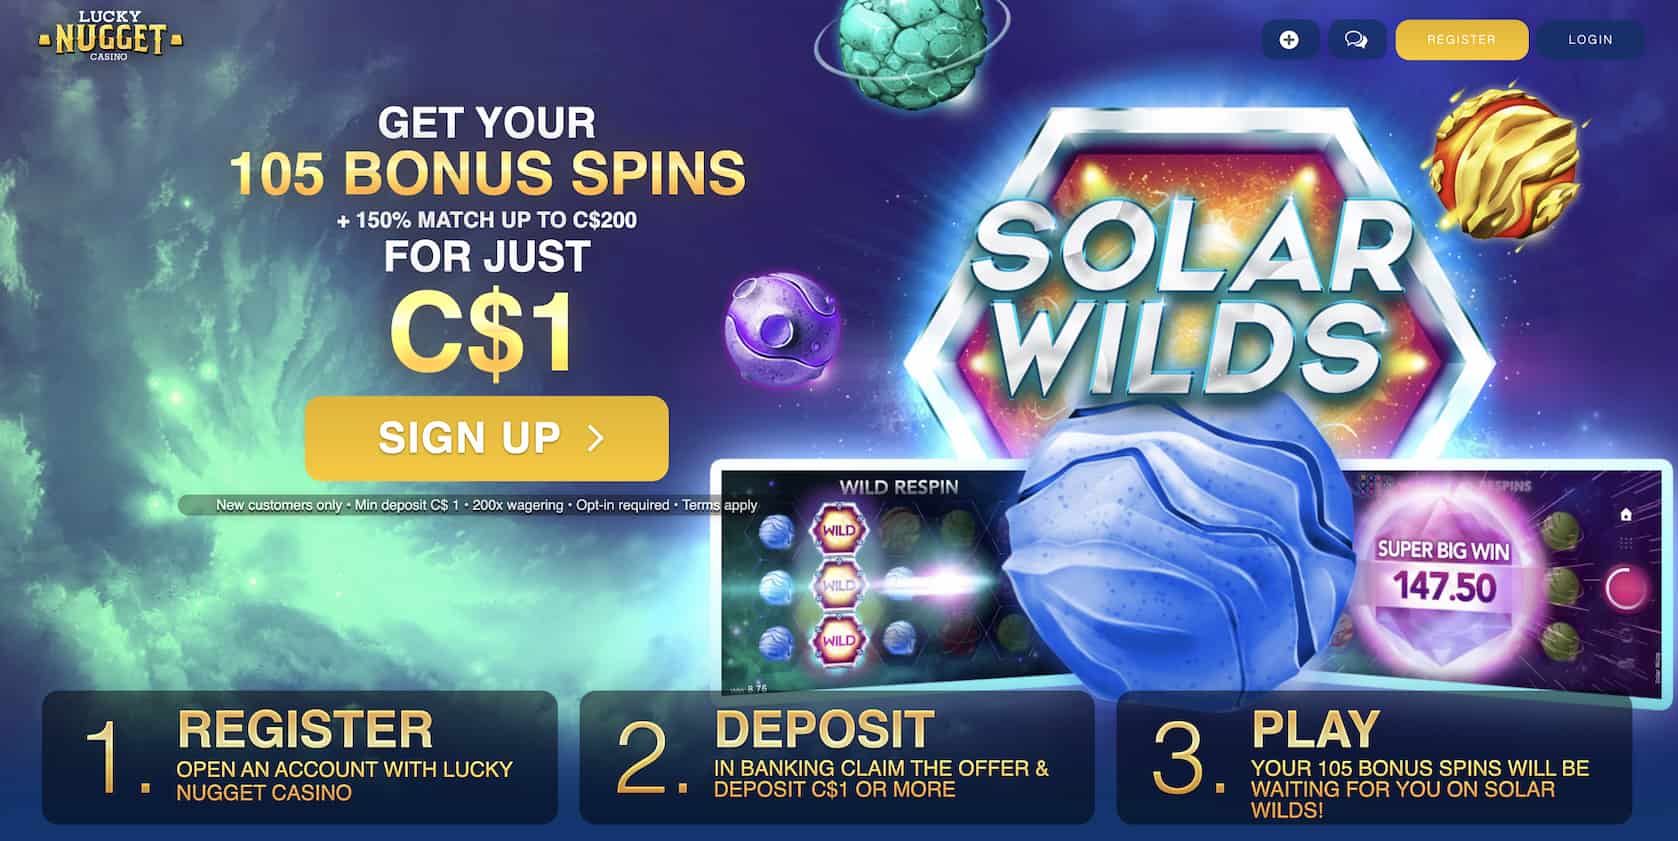 9 Ways Free Spins For $1 Can Make You Invincible